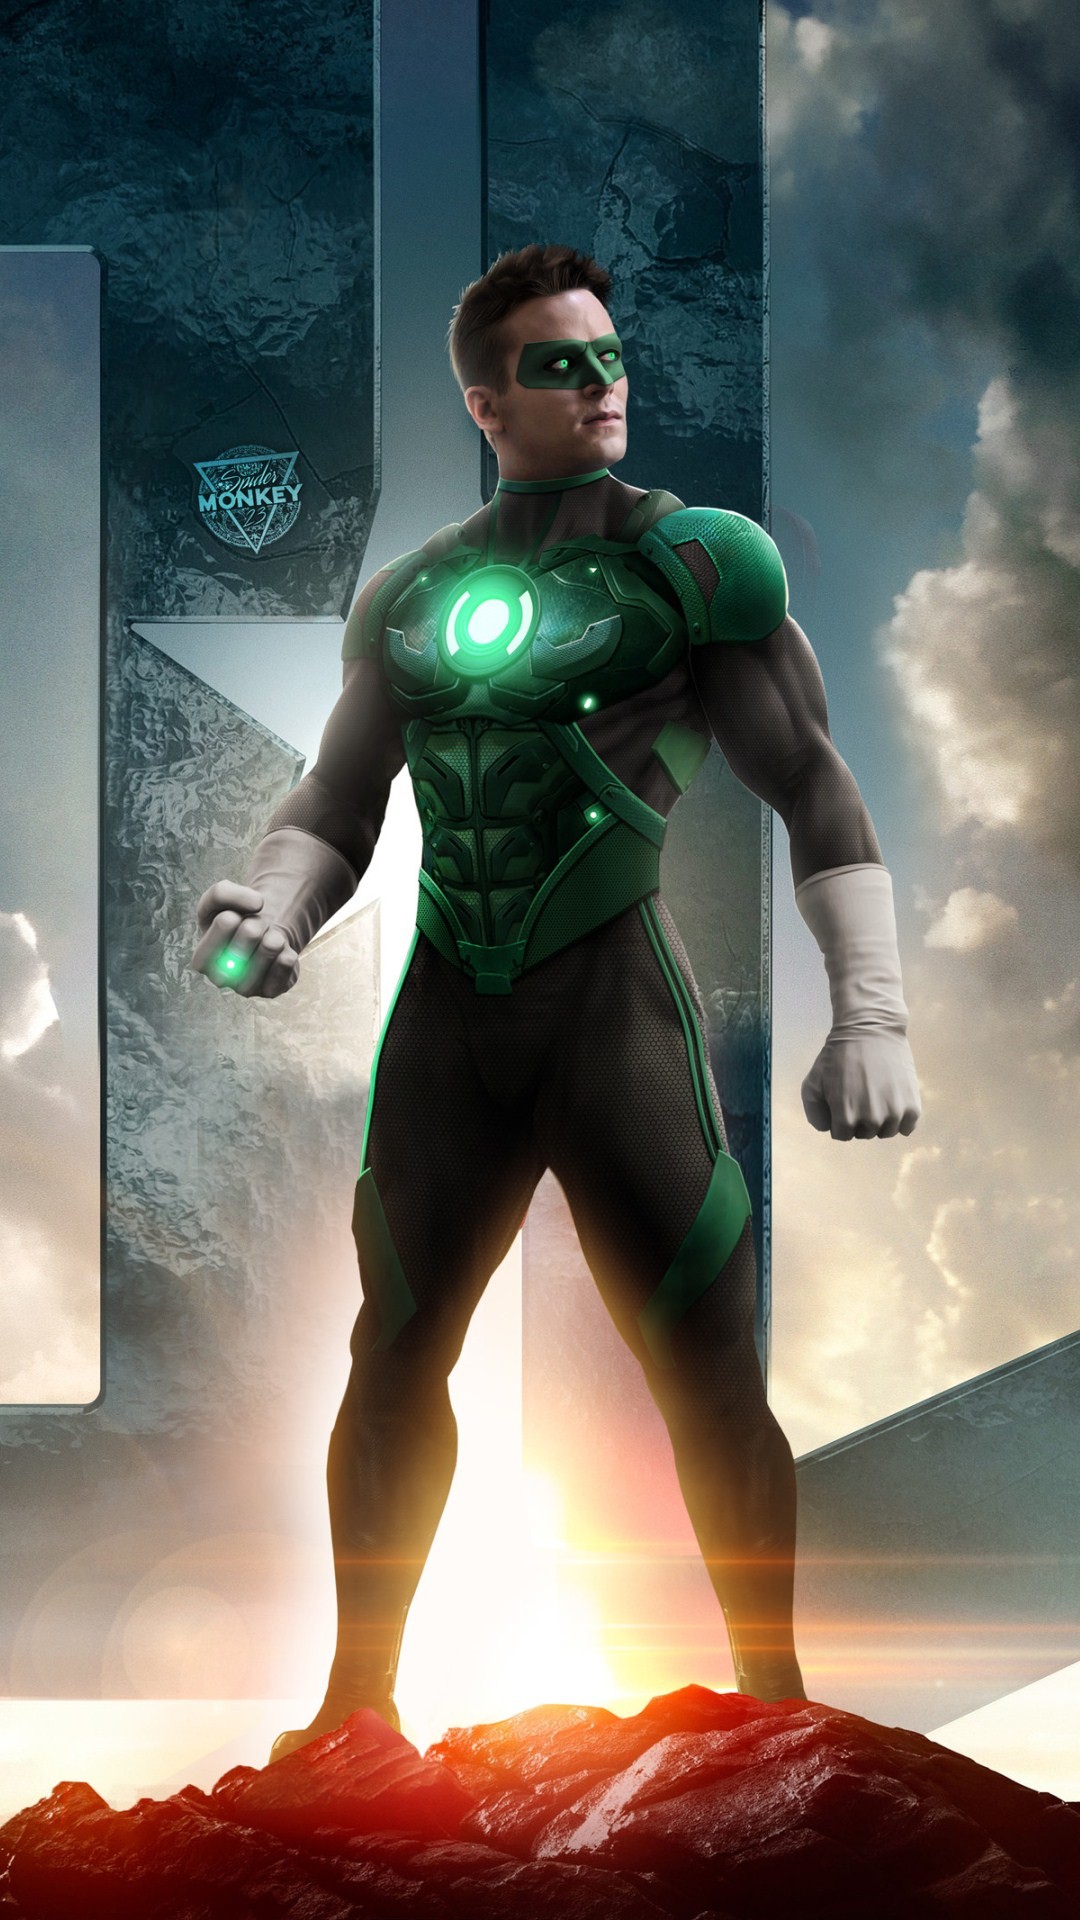 1080x1920 Green Lantern Justice League iPhone Wallpaper. Free Download